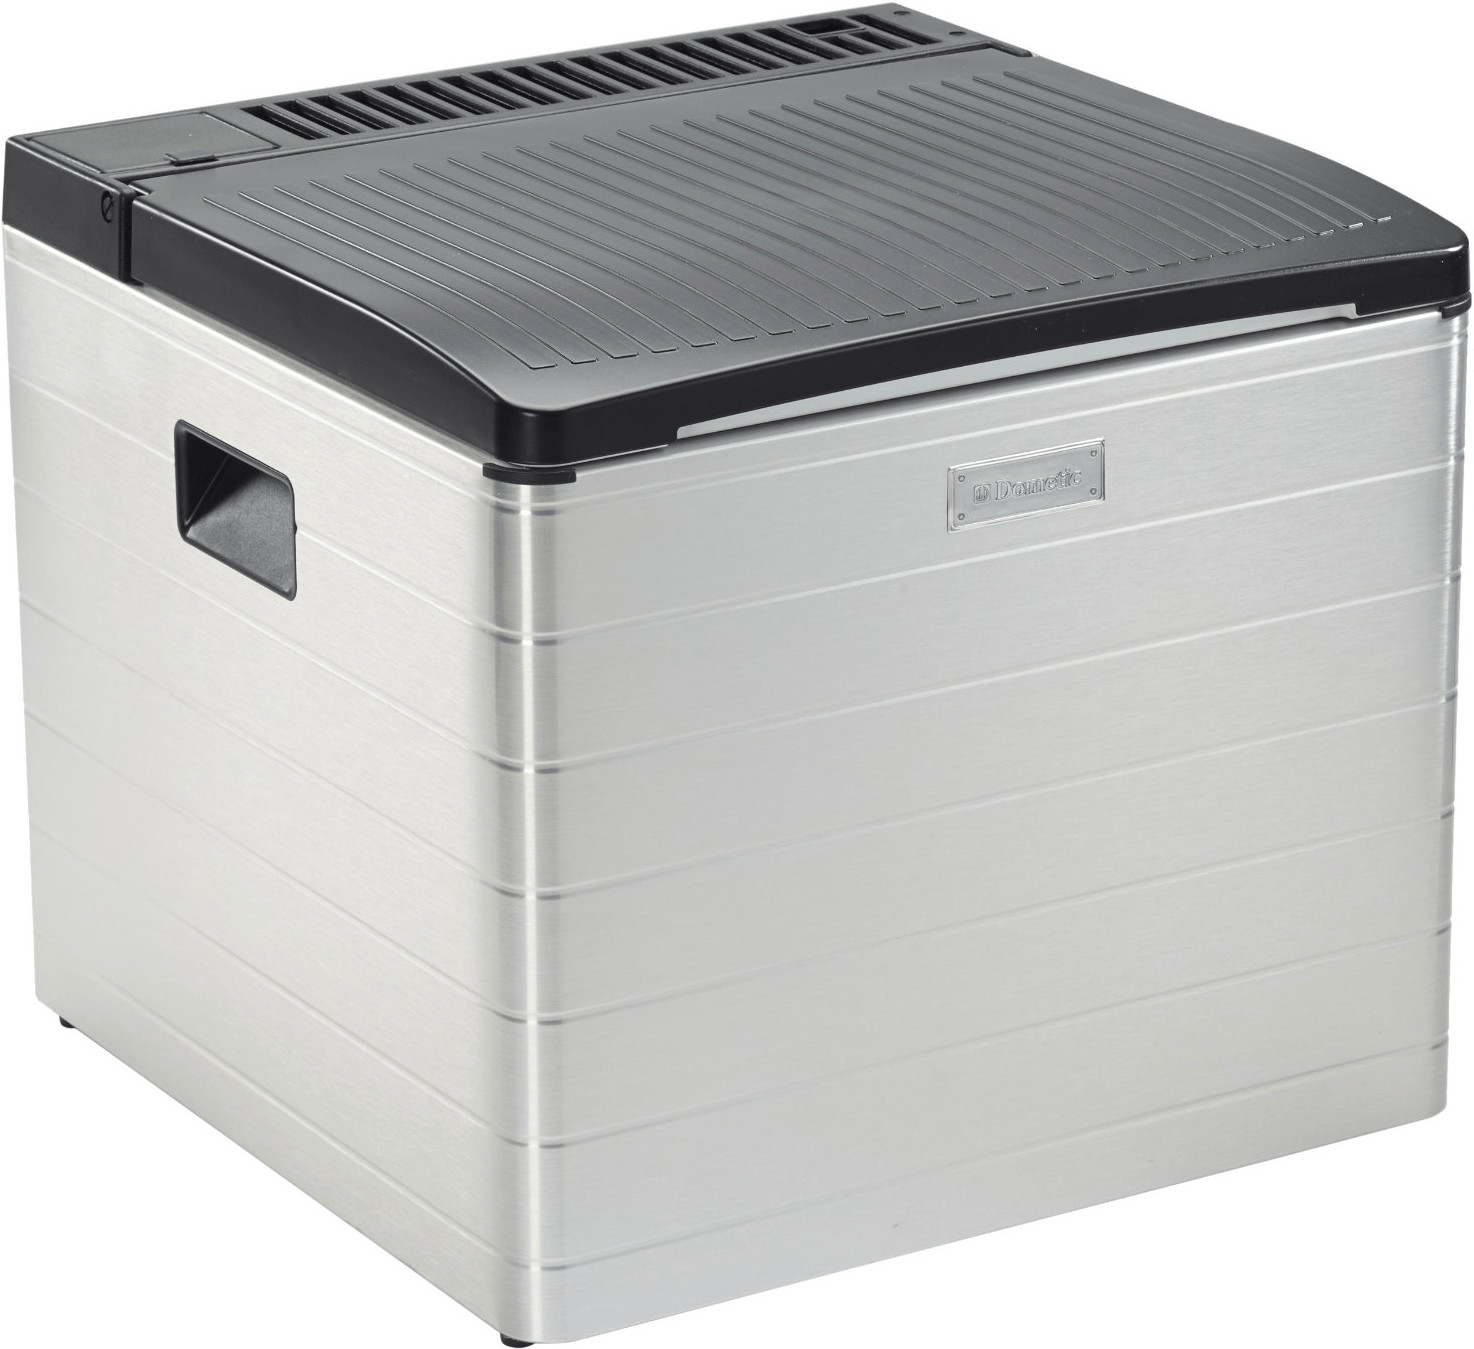 Dometic CombiCool RC 2200 3-Way Portable Absorption Cool Box (12 V